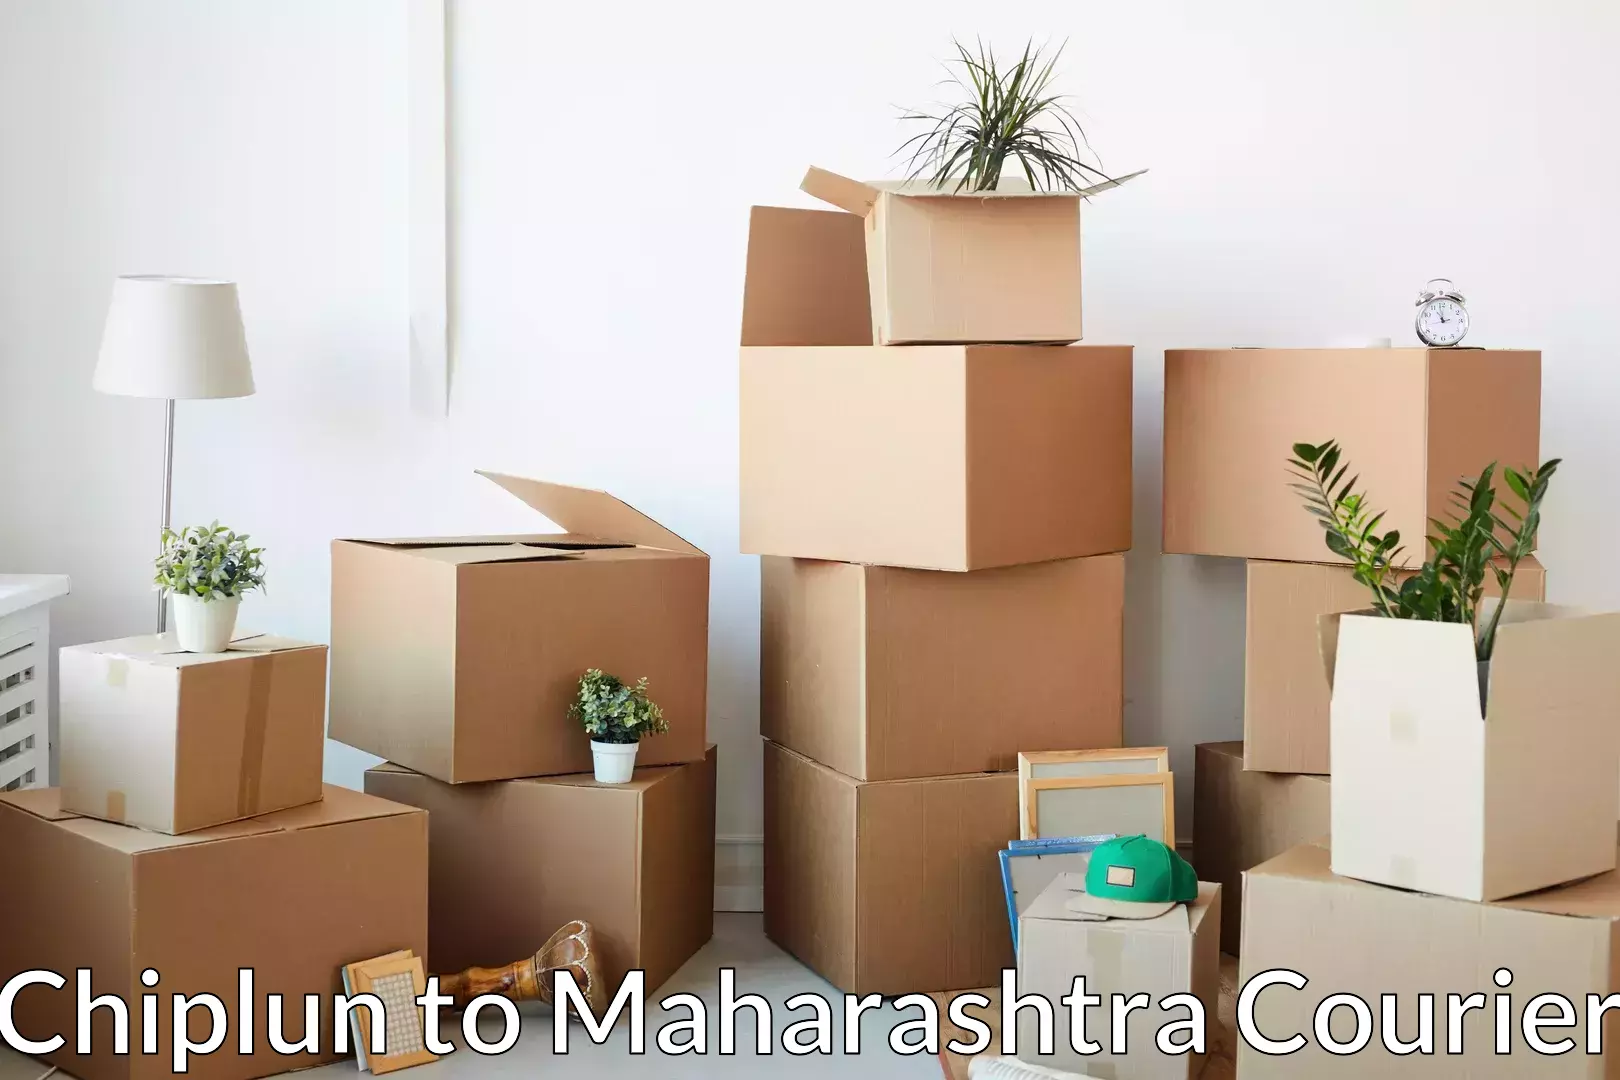 Professional movers and packers in Chiplun to Aurangabad